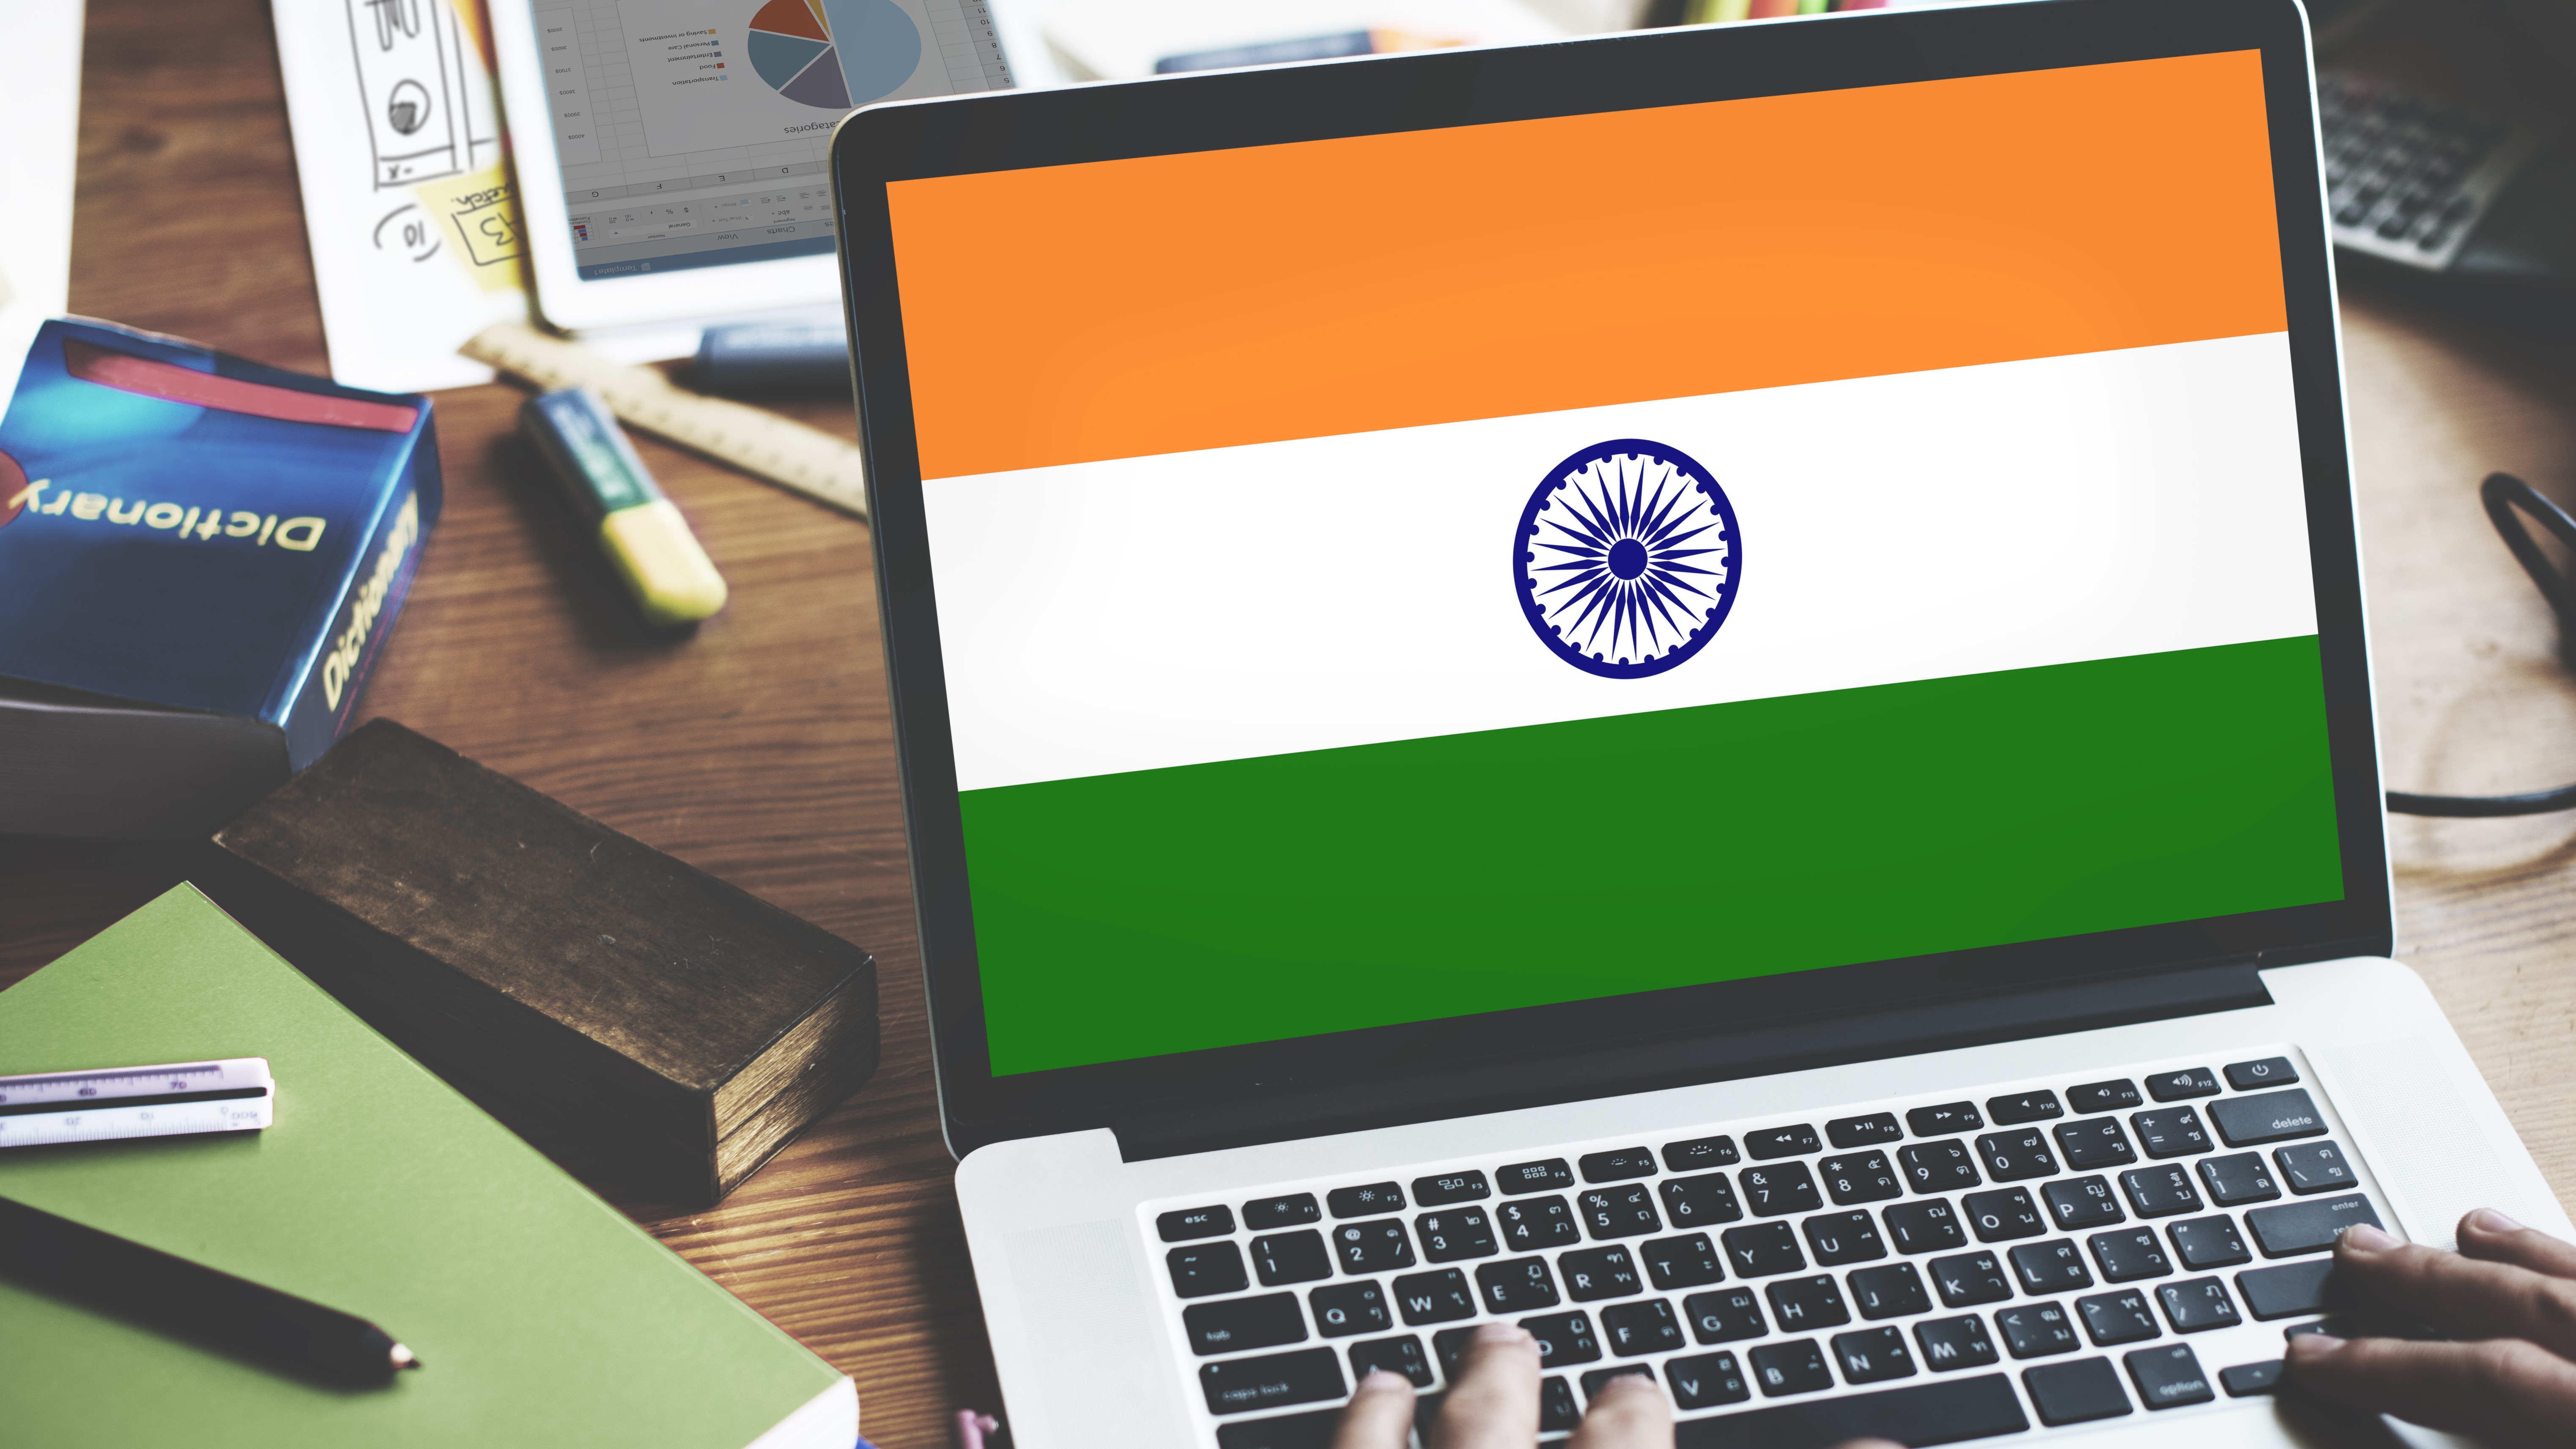 NordVPN set to leave India citing fears over freedom of speech